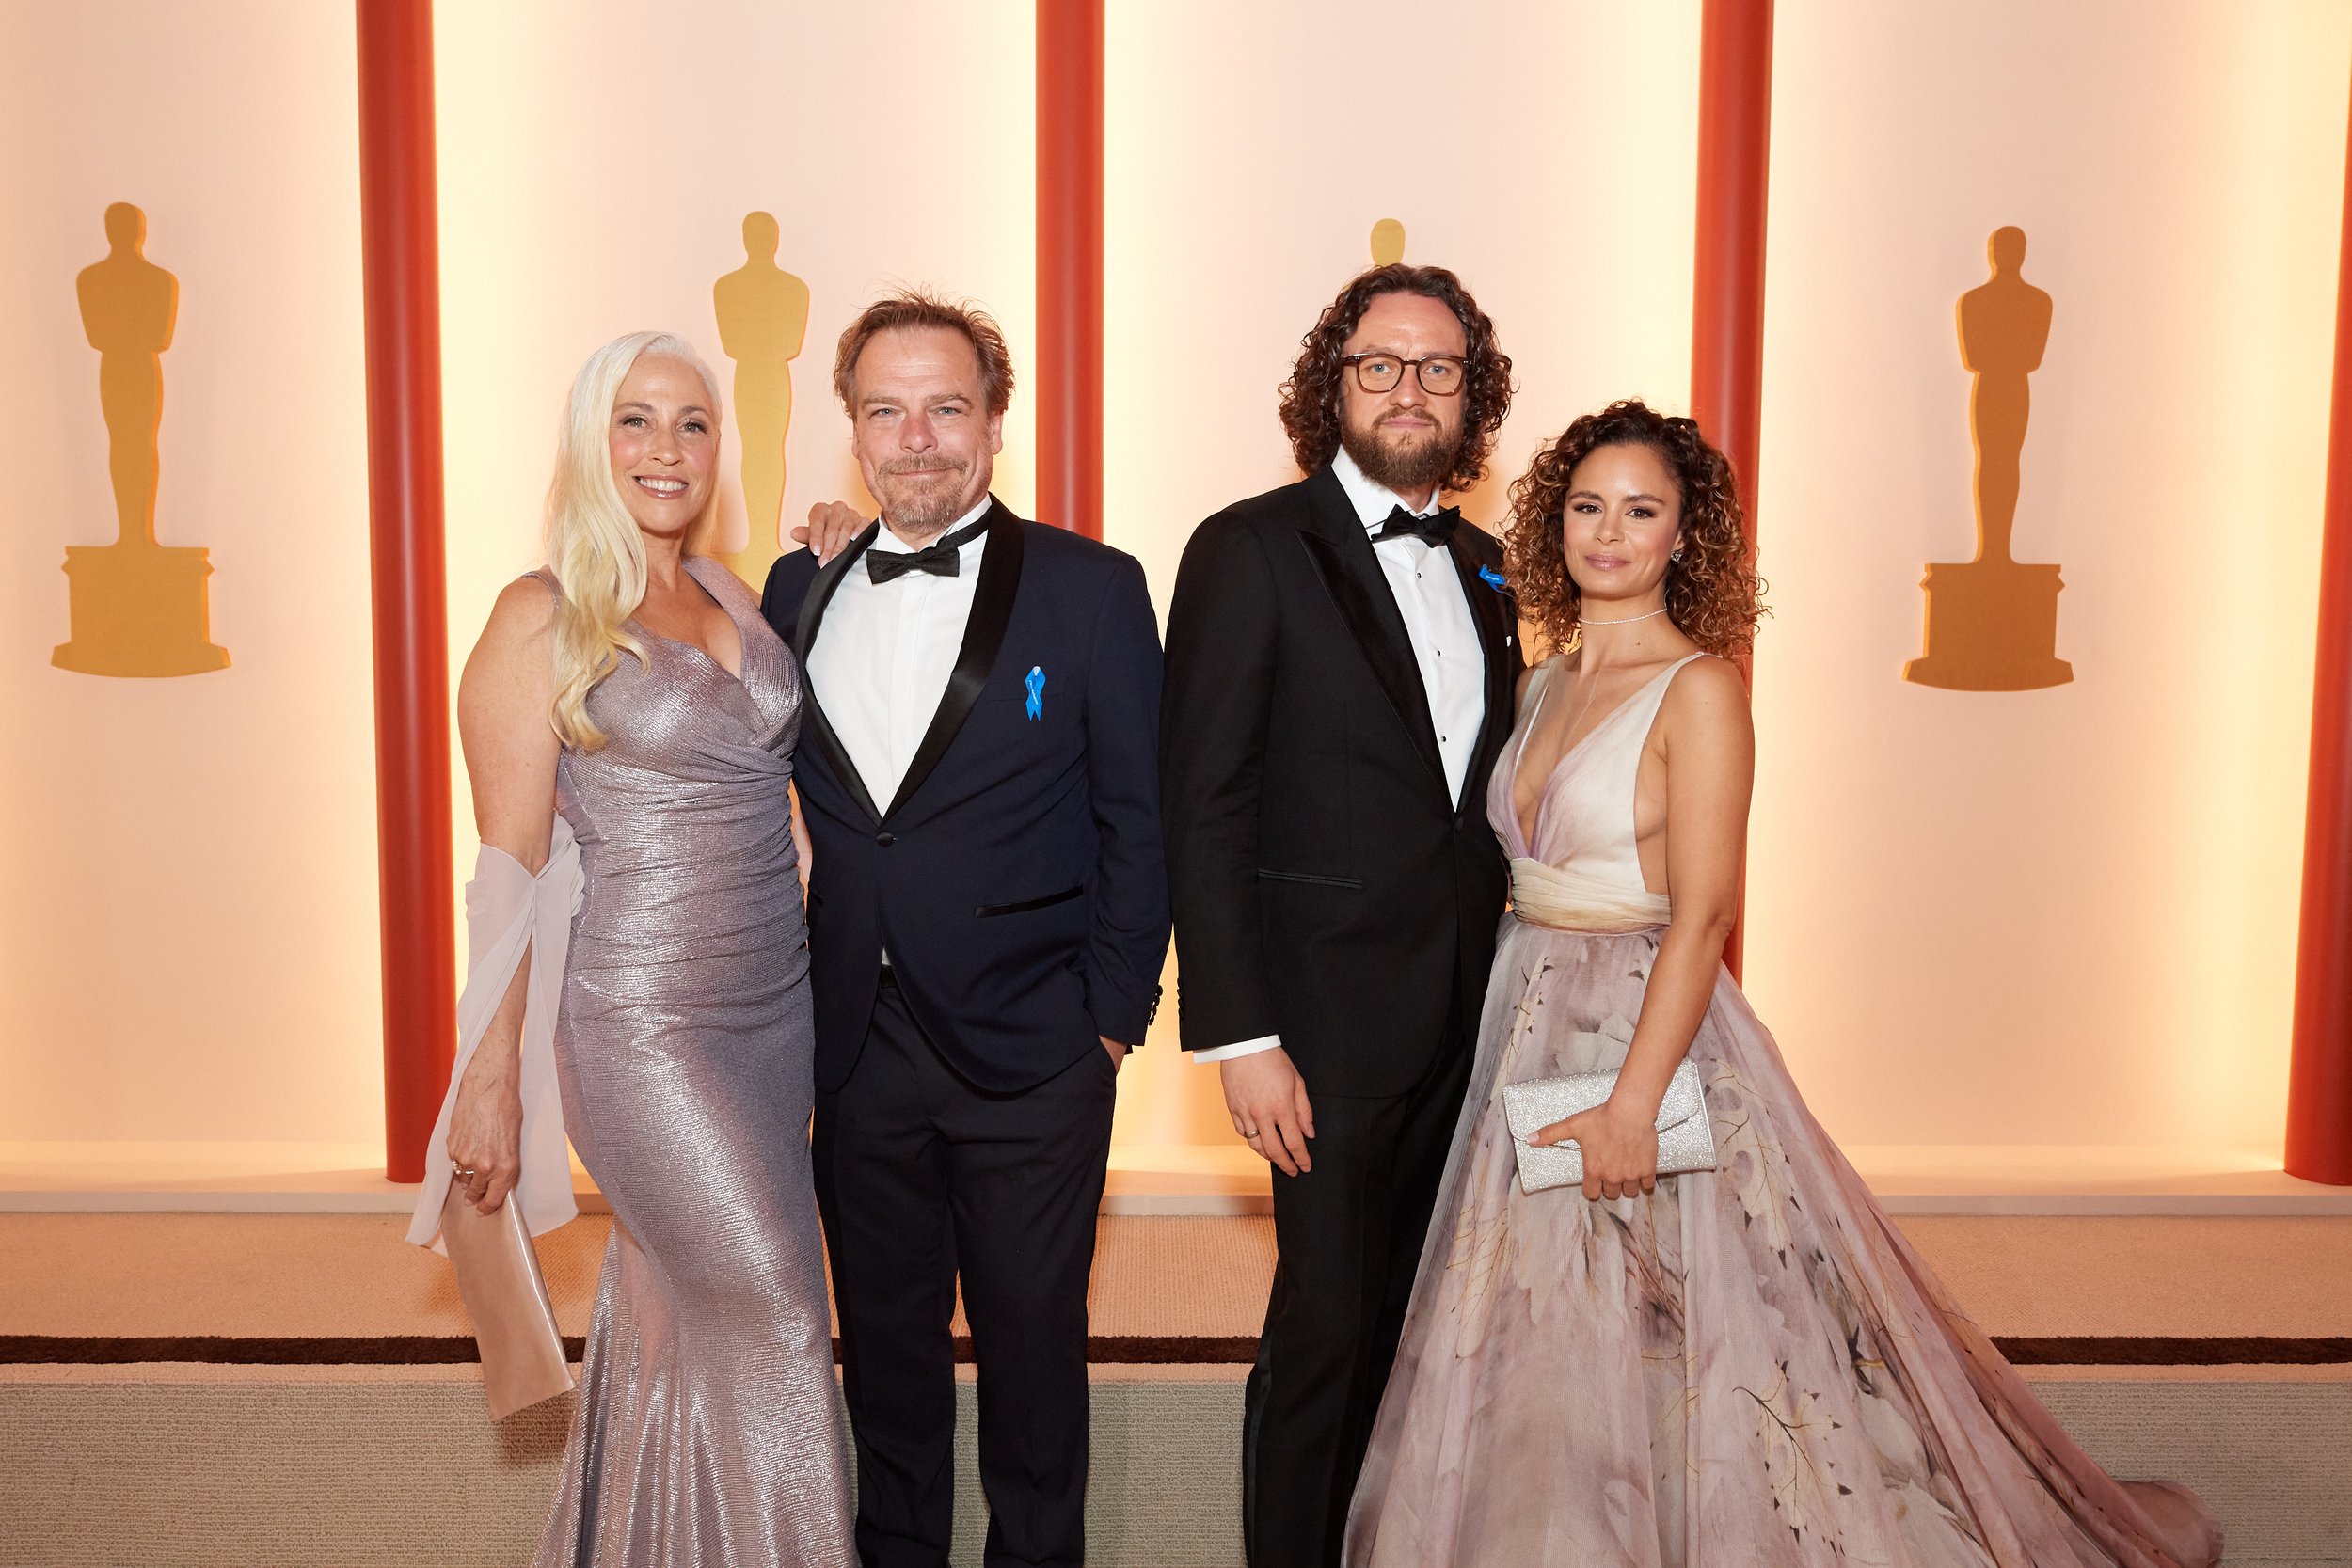 Oscar® nominees Frank Petzold, Markus Frank and guests arrive on the red carpet of the 95th Oscars